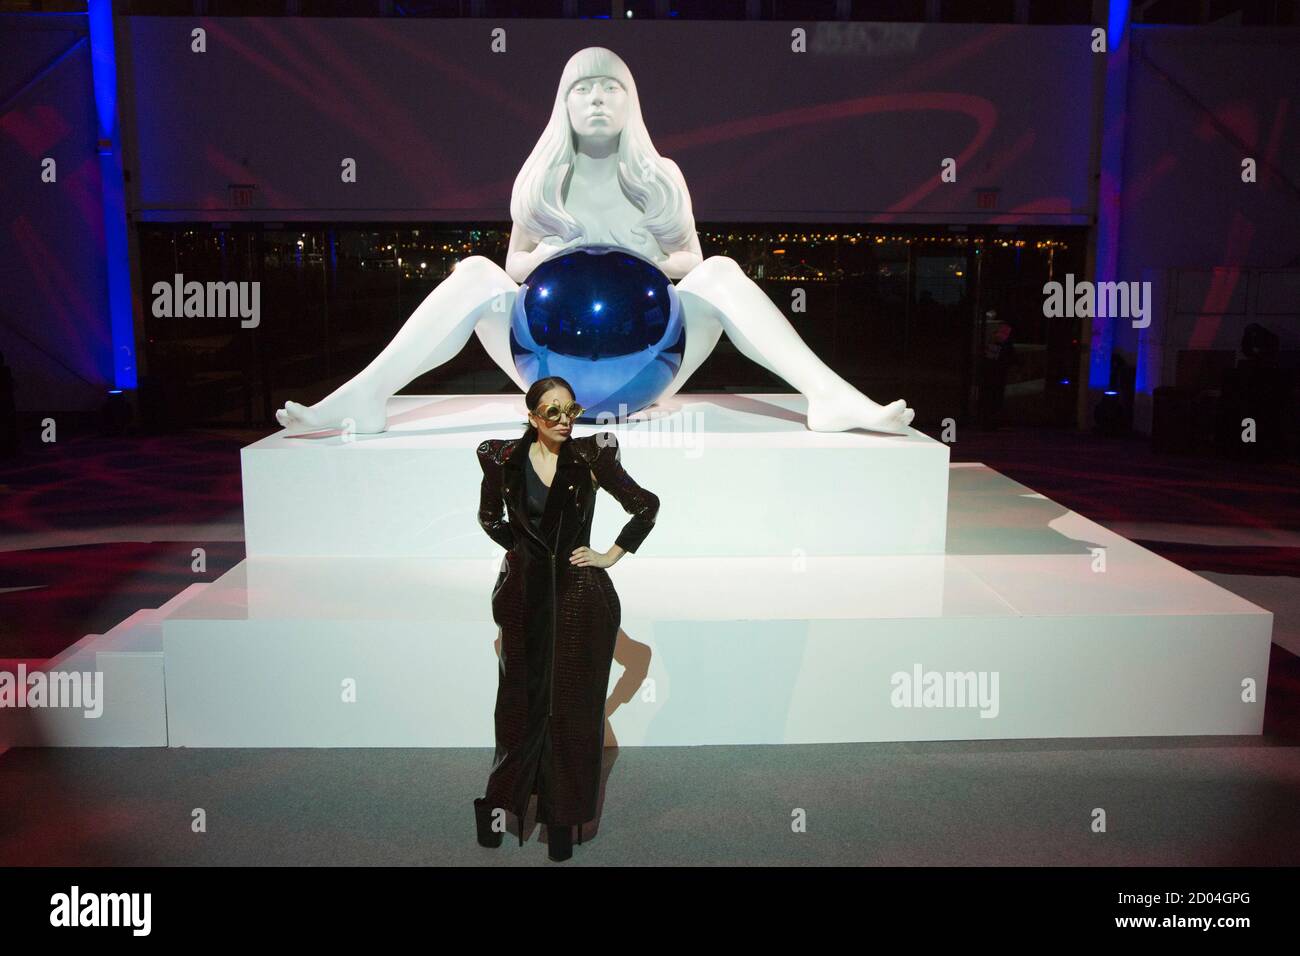 Lady Gaga poses with a sculpture of her by artist Jeff Koons at the  "artRave" release event of her new album "ARTPOP" in New York November 10,  2013. The event included a